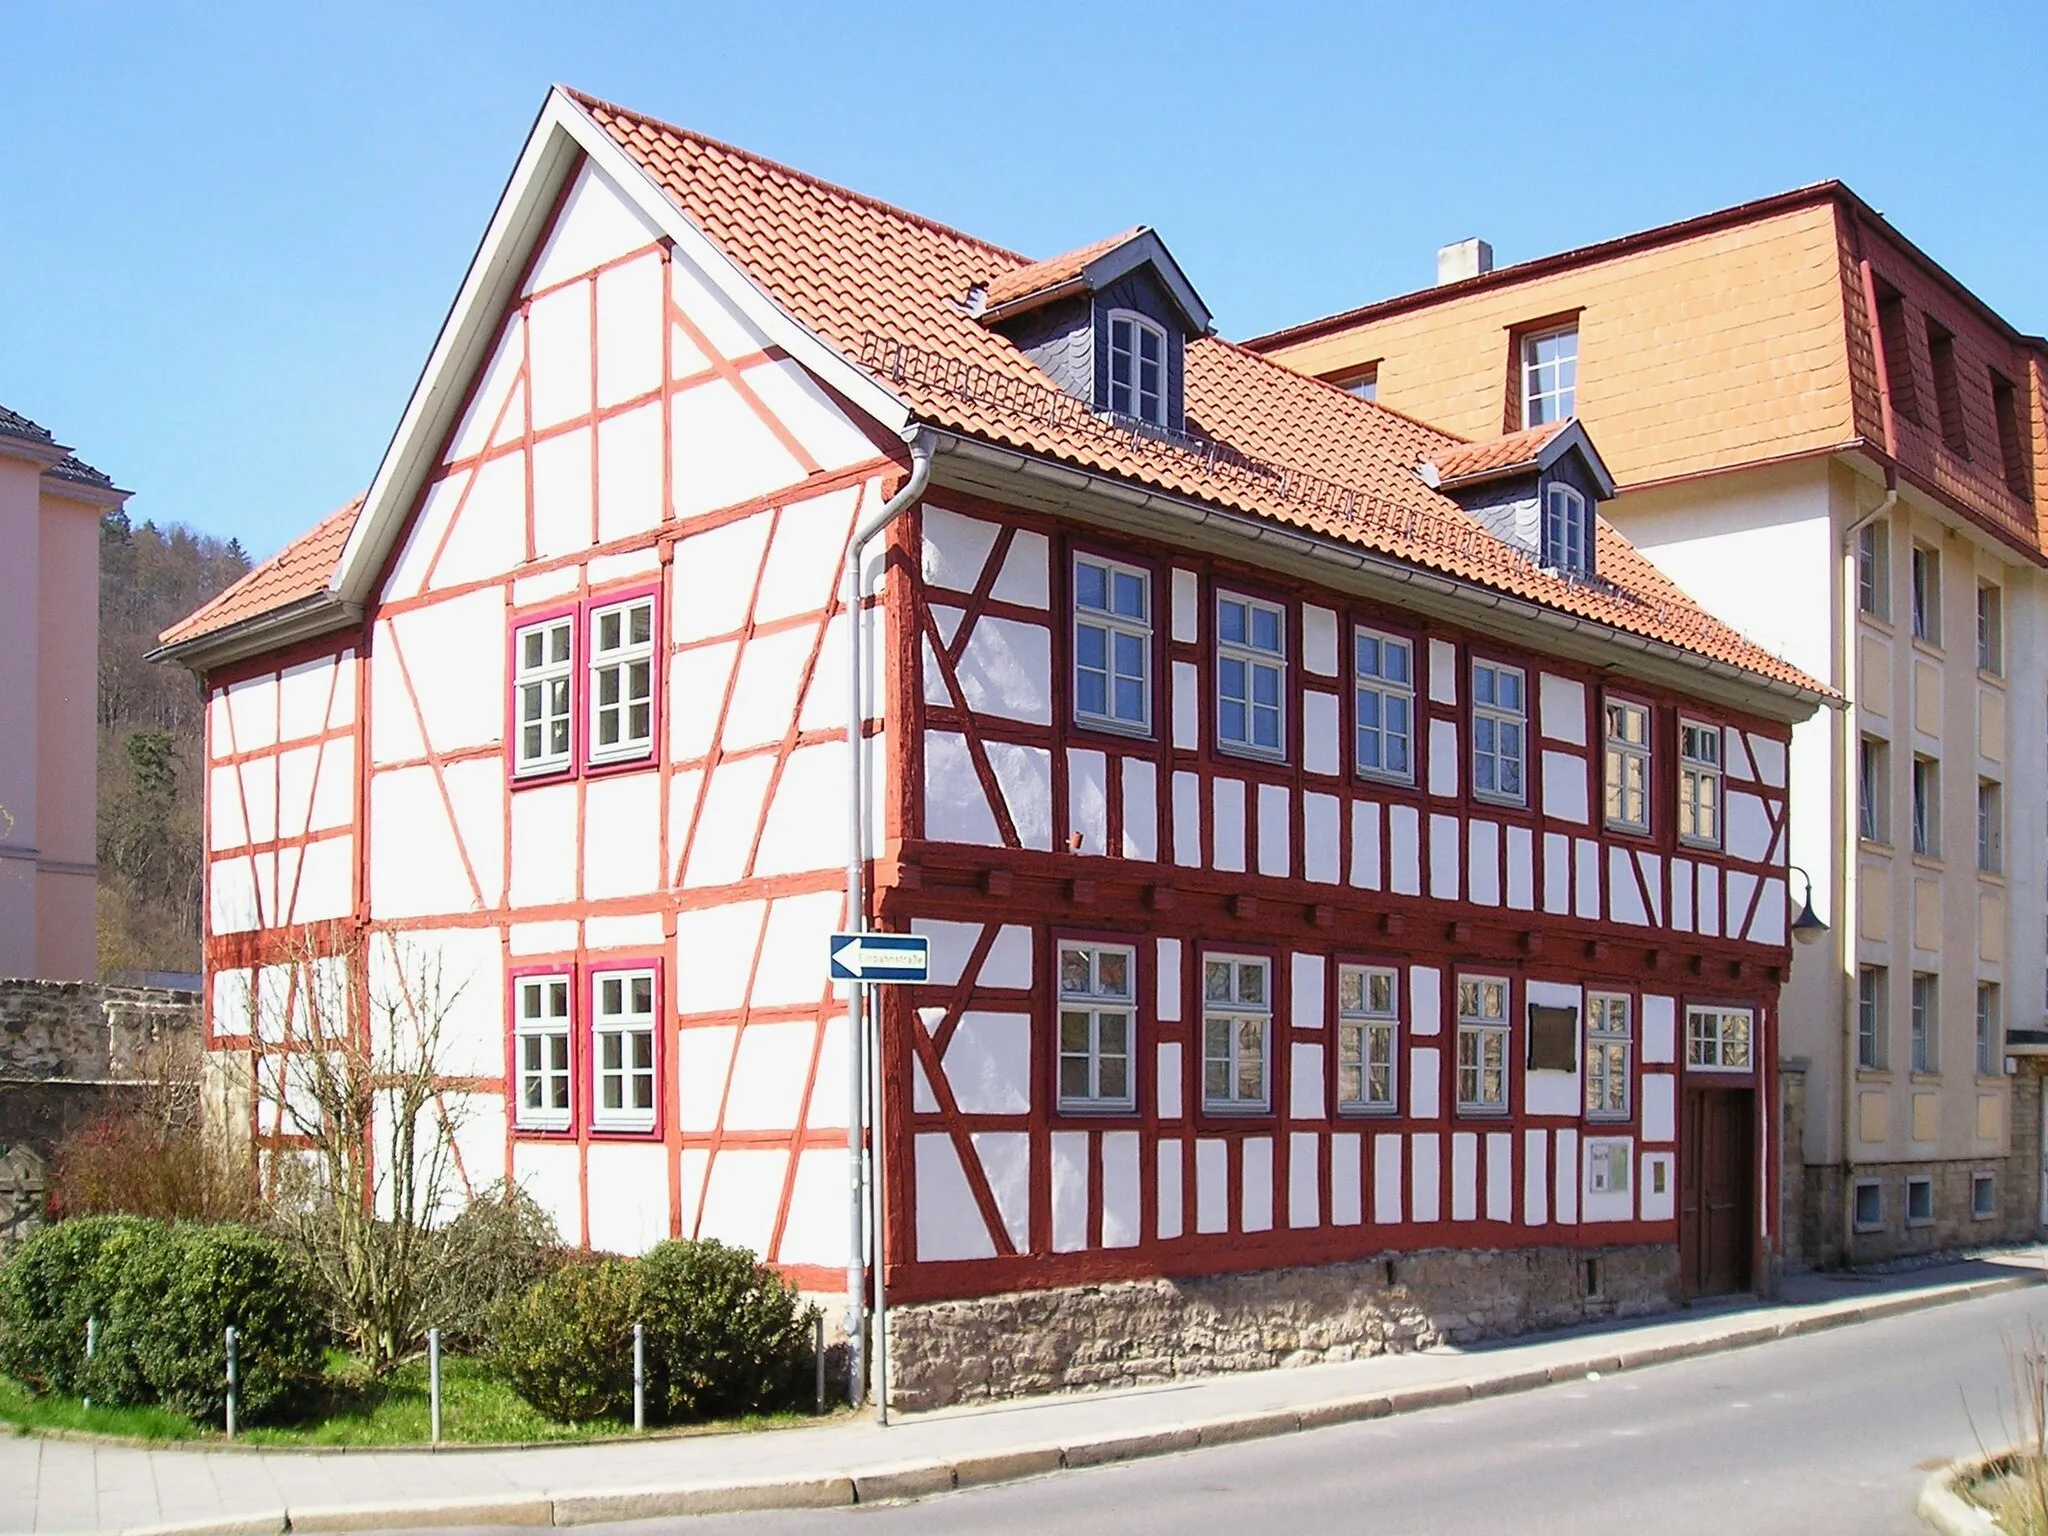 Photo showing: House of the poet Rudolf Baumbach, now home of the Museum of Literature "Baumbachhaus" Meininger museums.